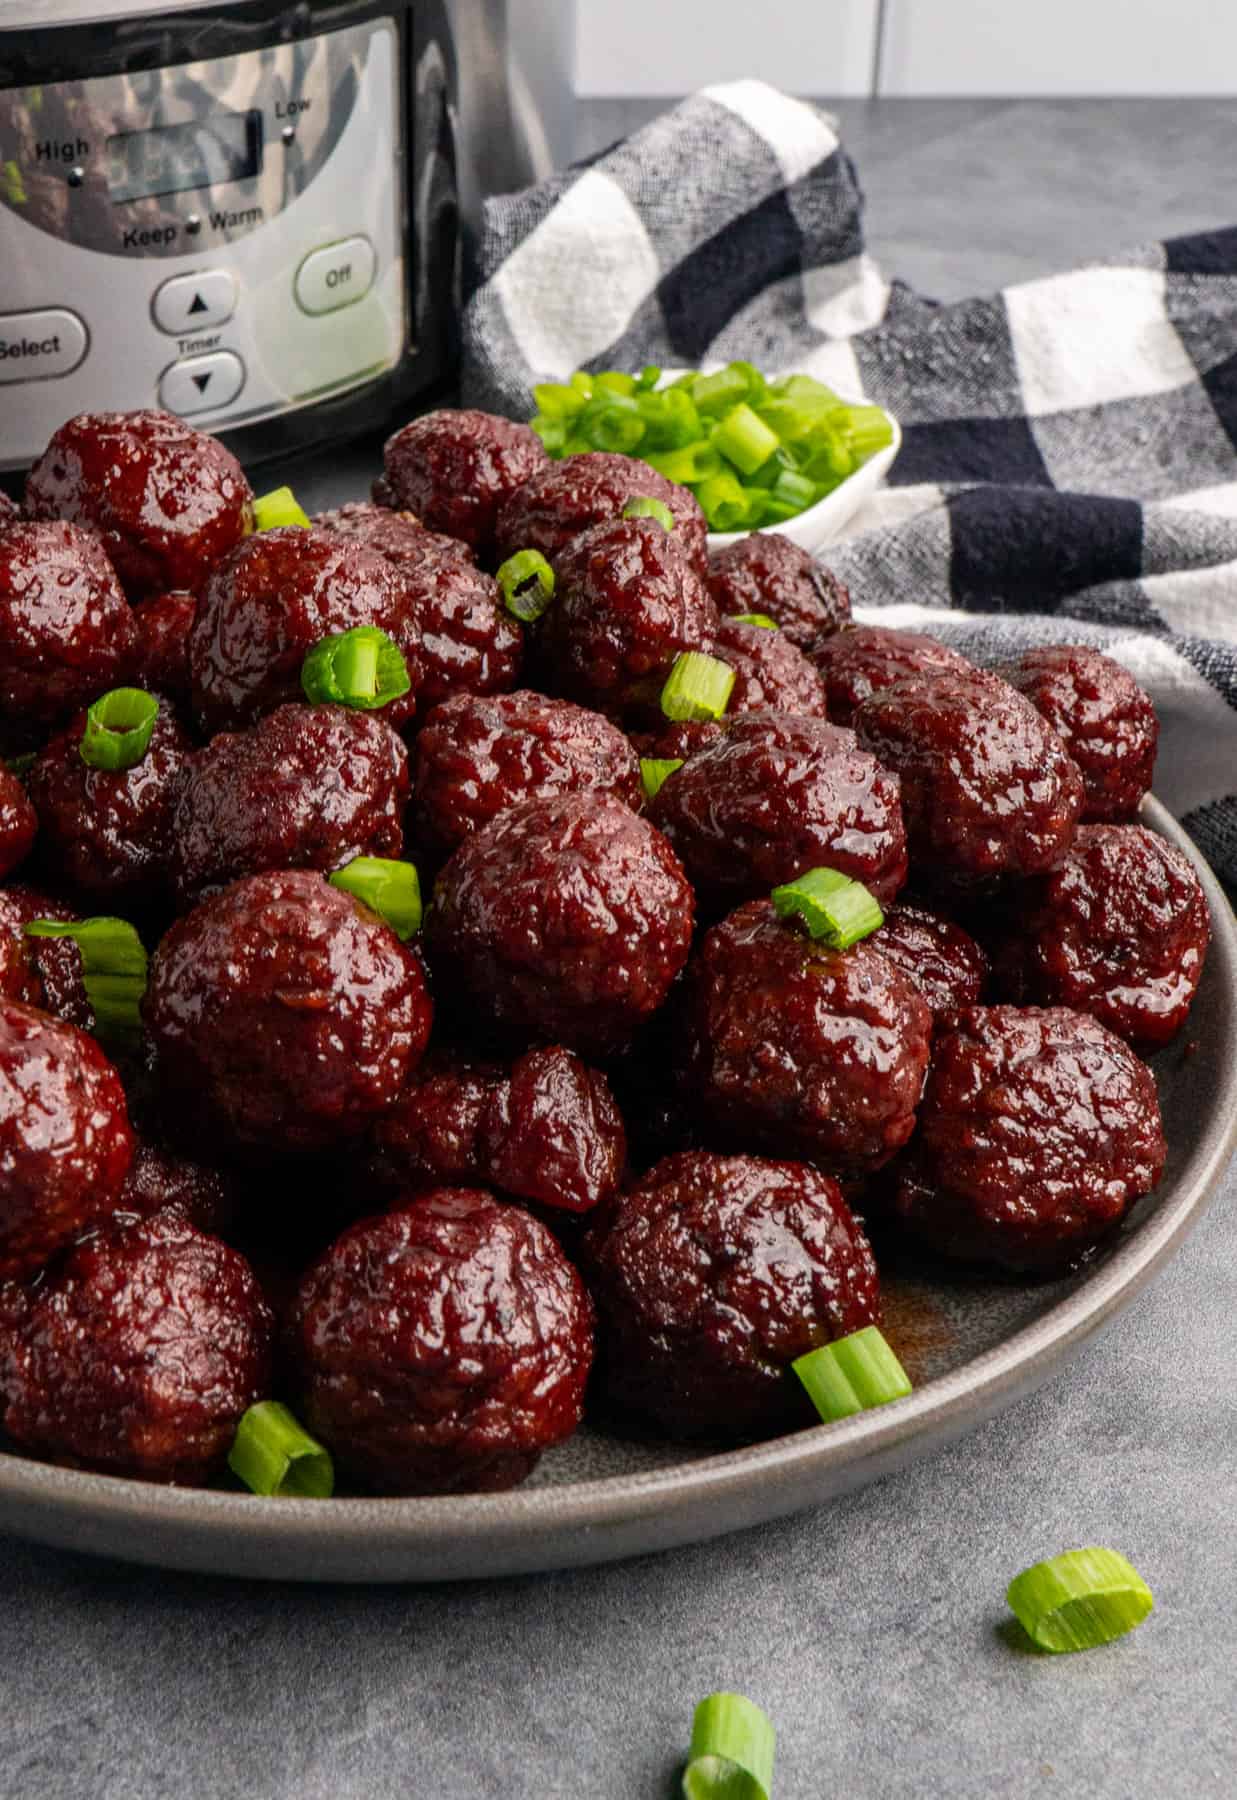 https://slowcookermeals.com/wp-content/uploads/2022/06/Crockpot-Meatballs-with-Grape-Jelly-and-Chili-Sauce-4.jpg